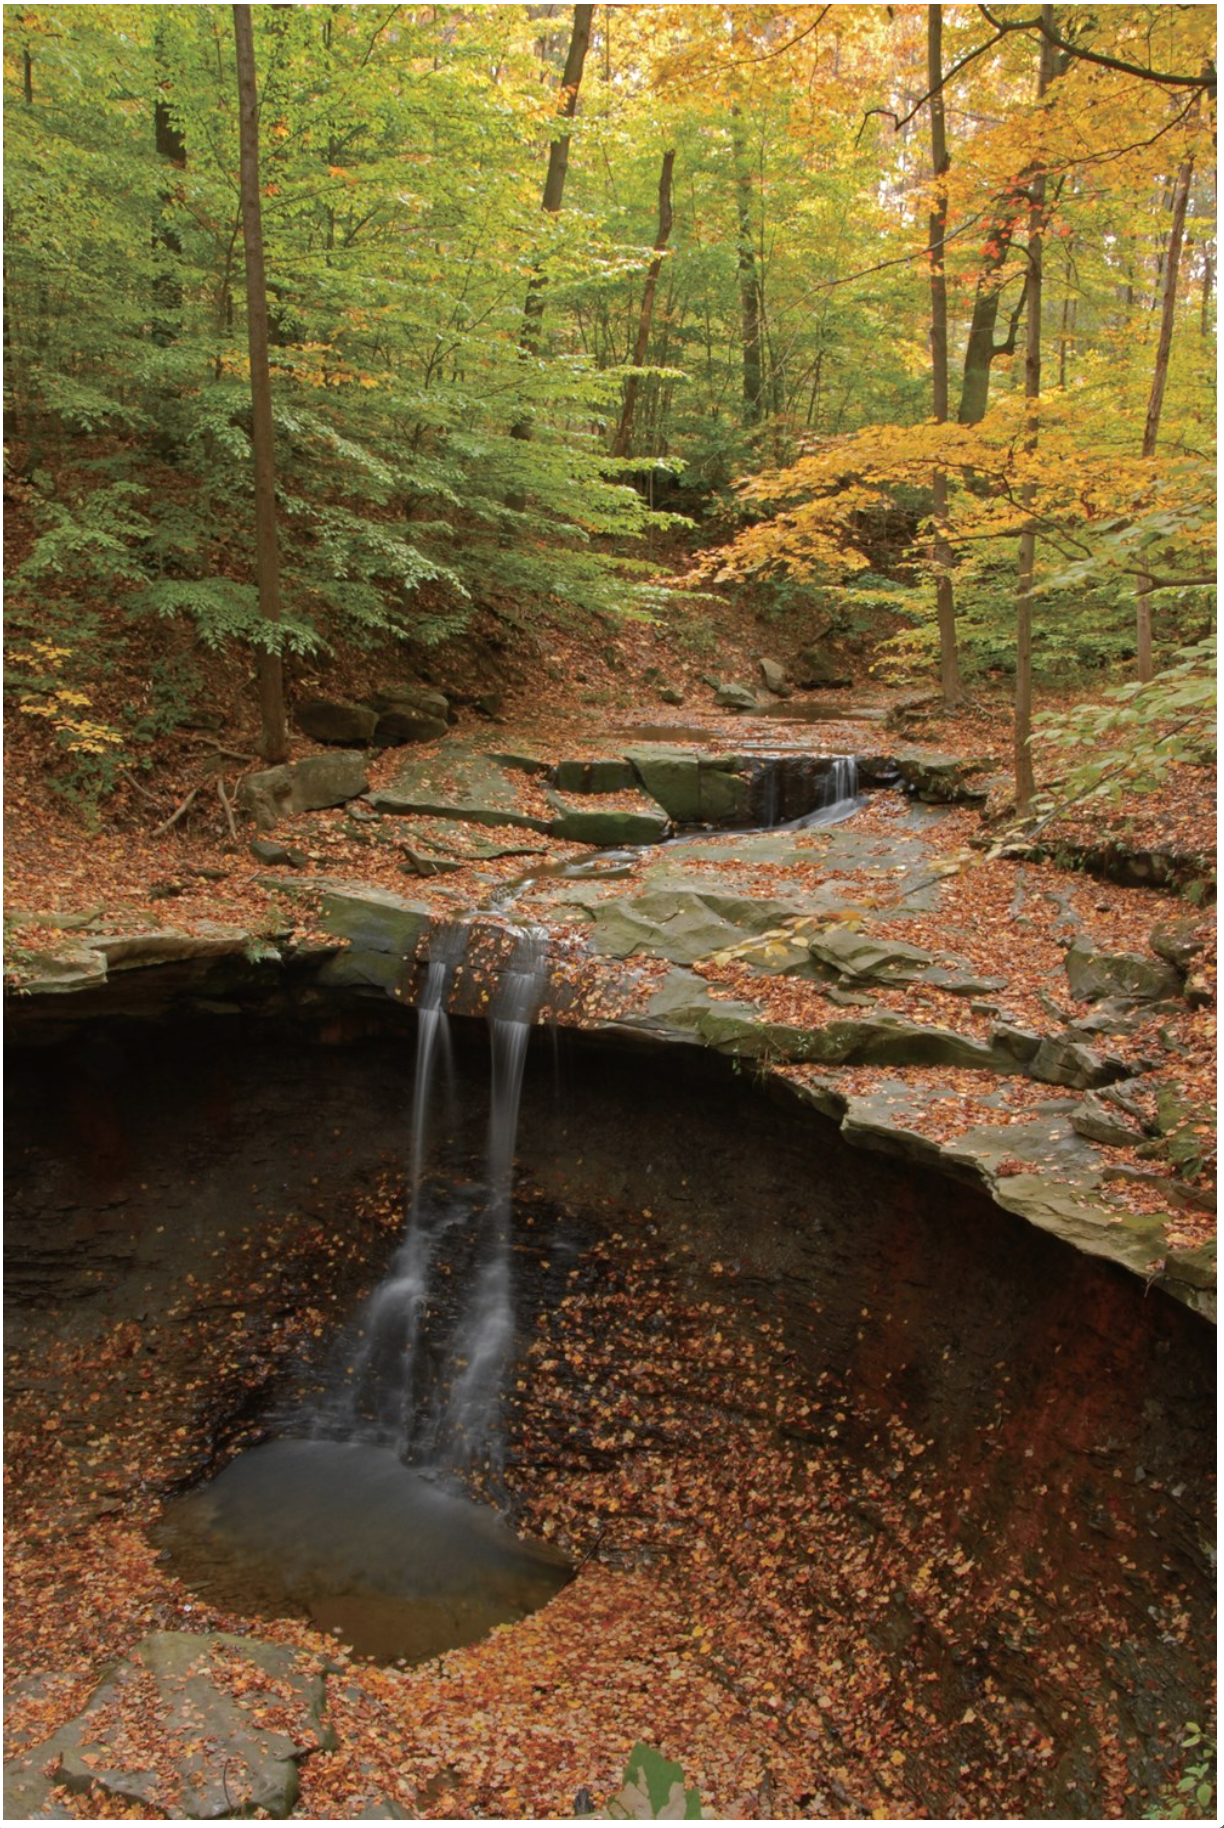 Hiking Ohio: A Guide to the States Greatest Hikes, 3rd Edition